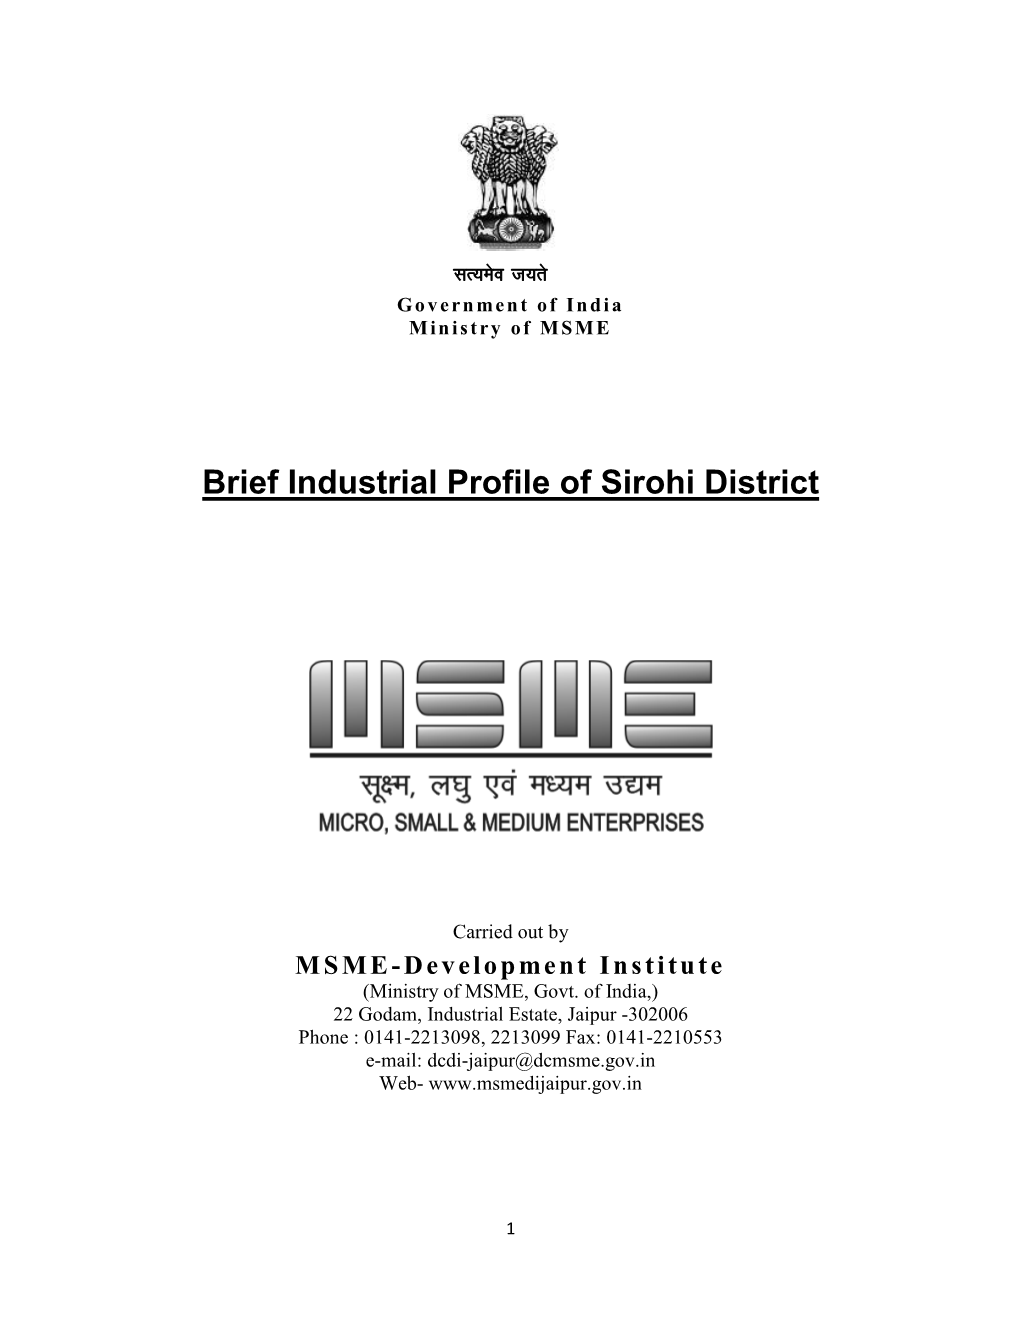 Brief Industrial Profile of Sirohi District